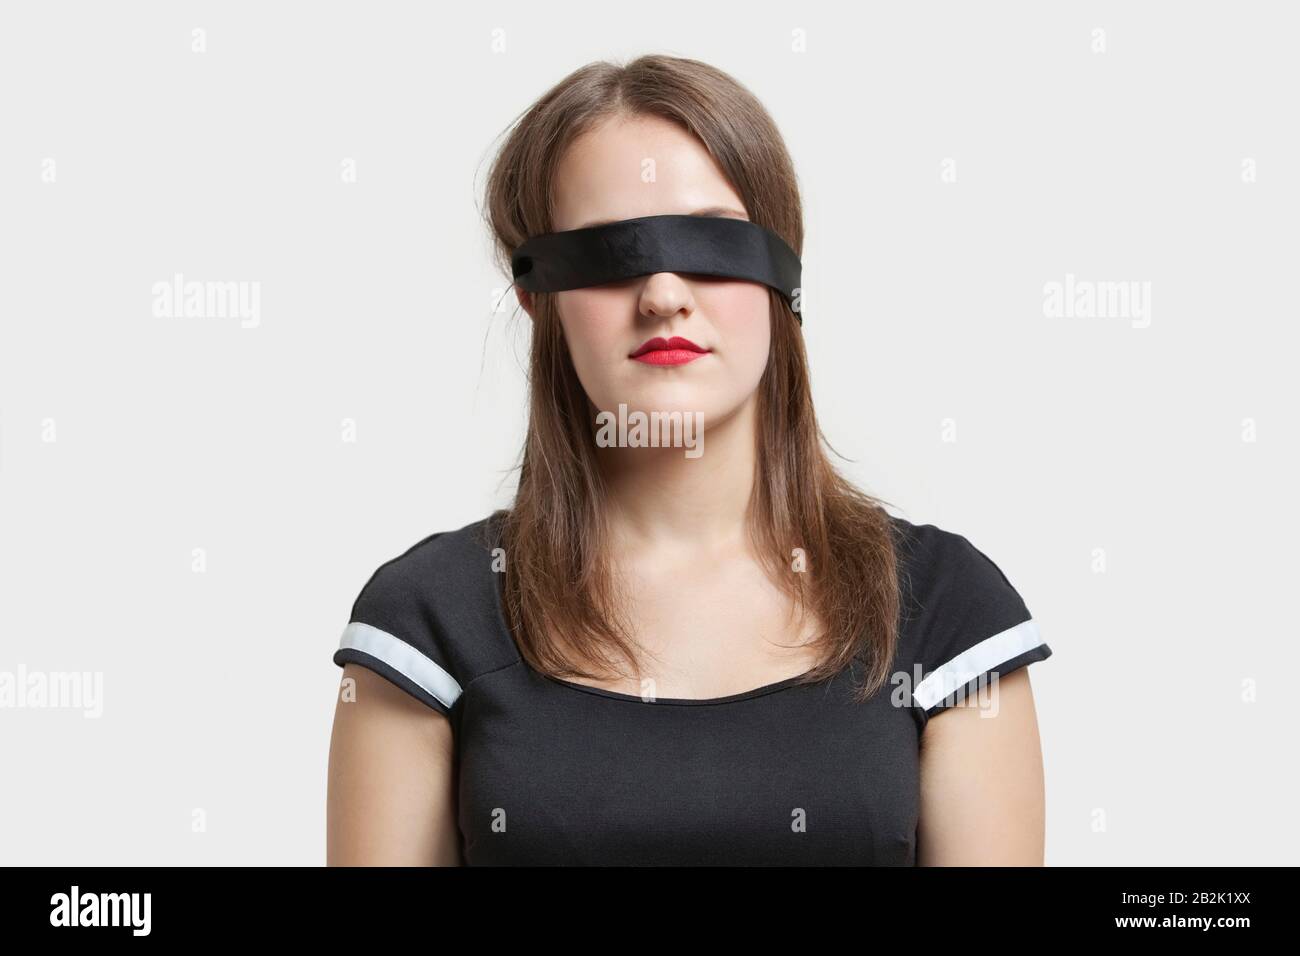 Young Woman Wearing Black Blindfold Isolated On Grey Stock Photo, Picture  and Royalty Free Image. Image 114818746.